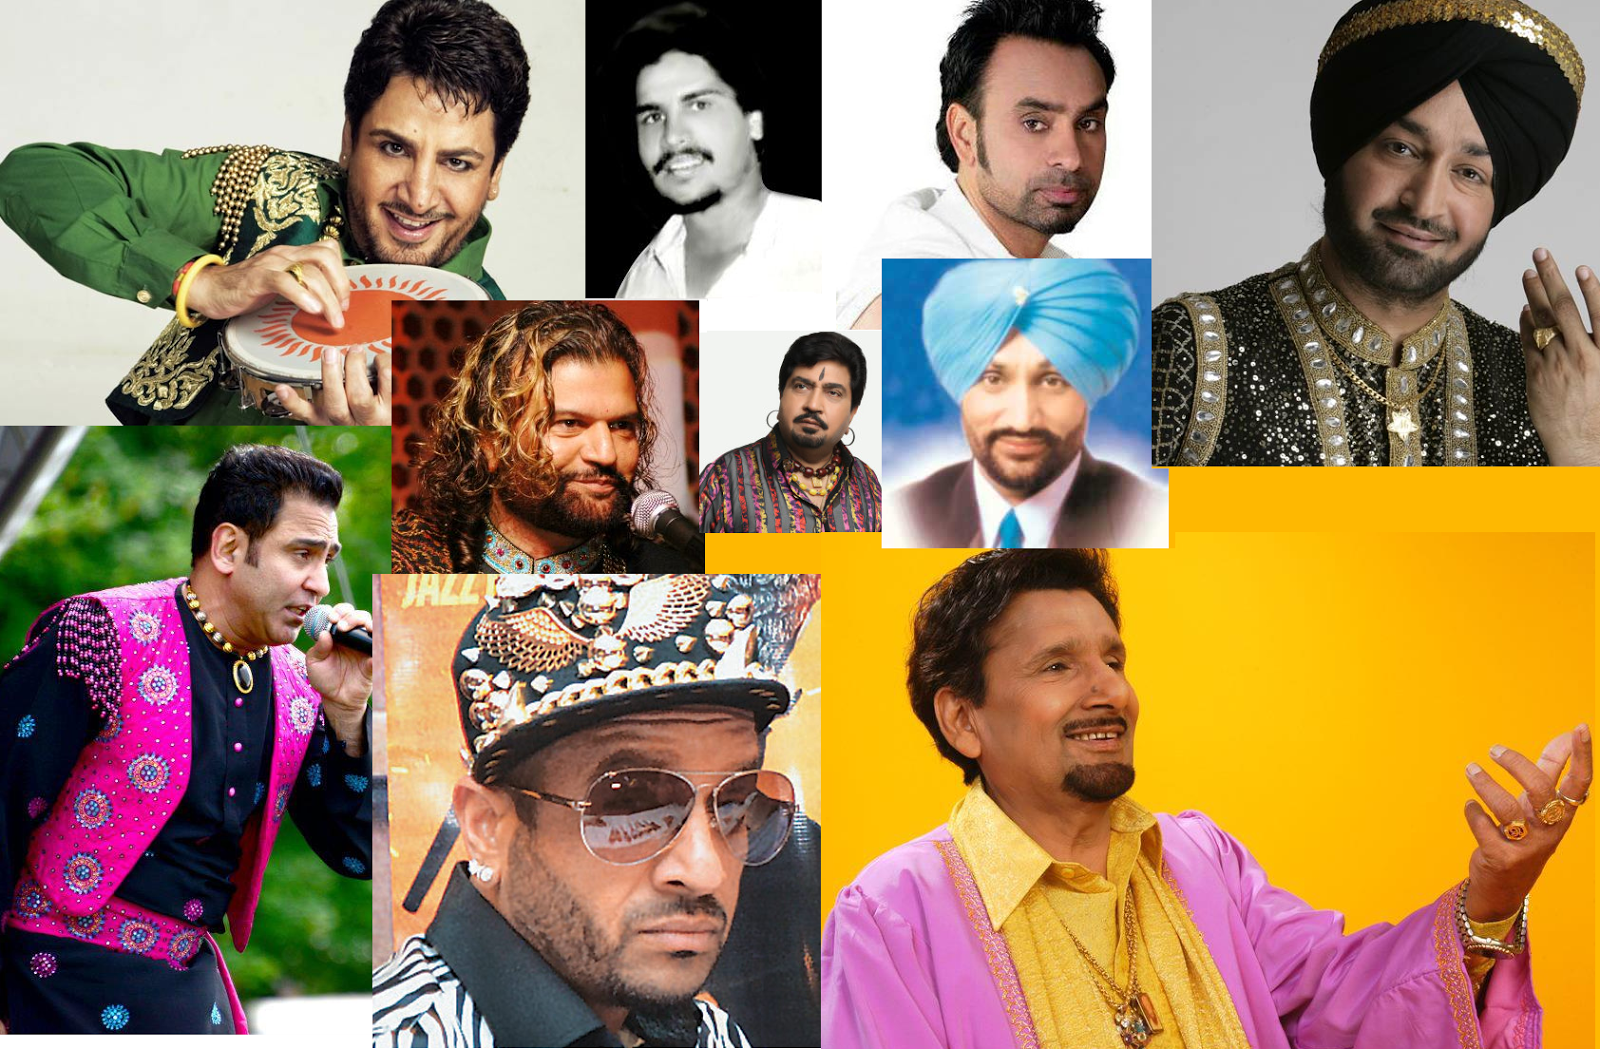 Top 10 Worlds Best Punjabi Singers of all time.